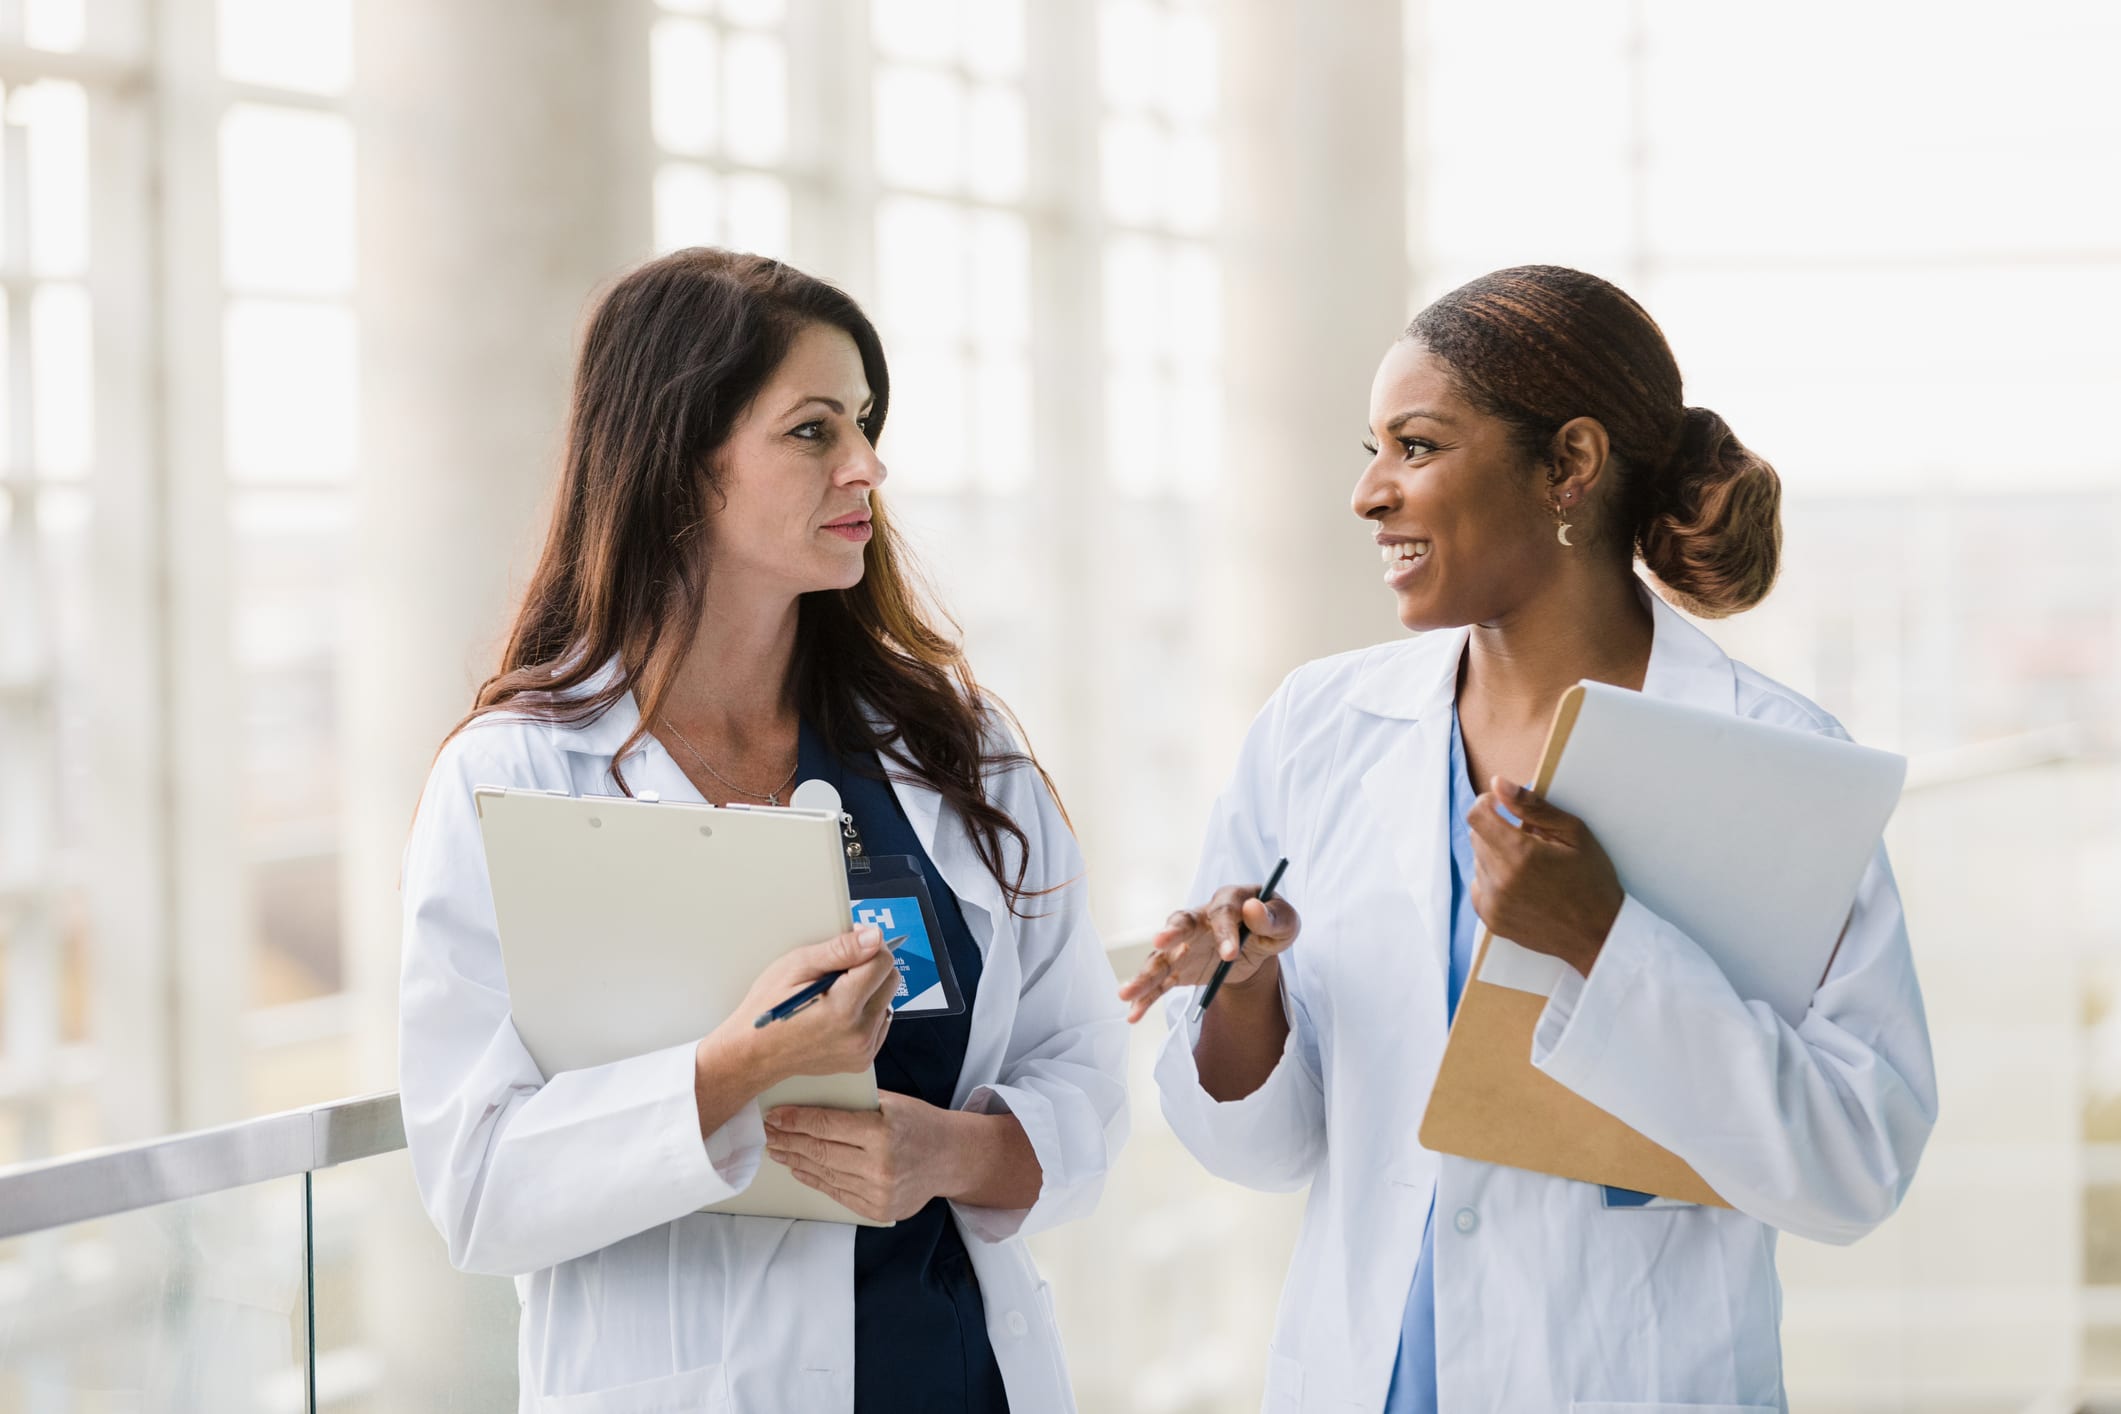 Female healthcare professionals walk and talk together